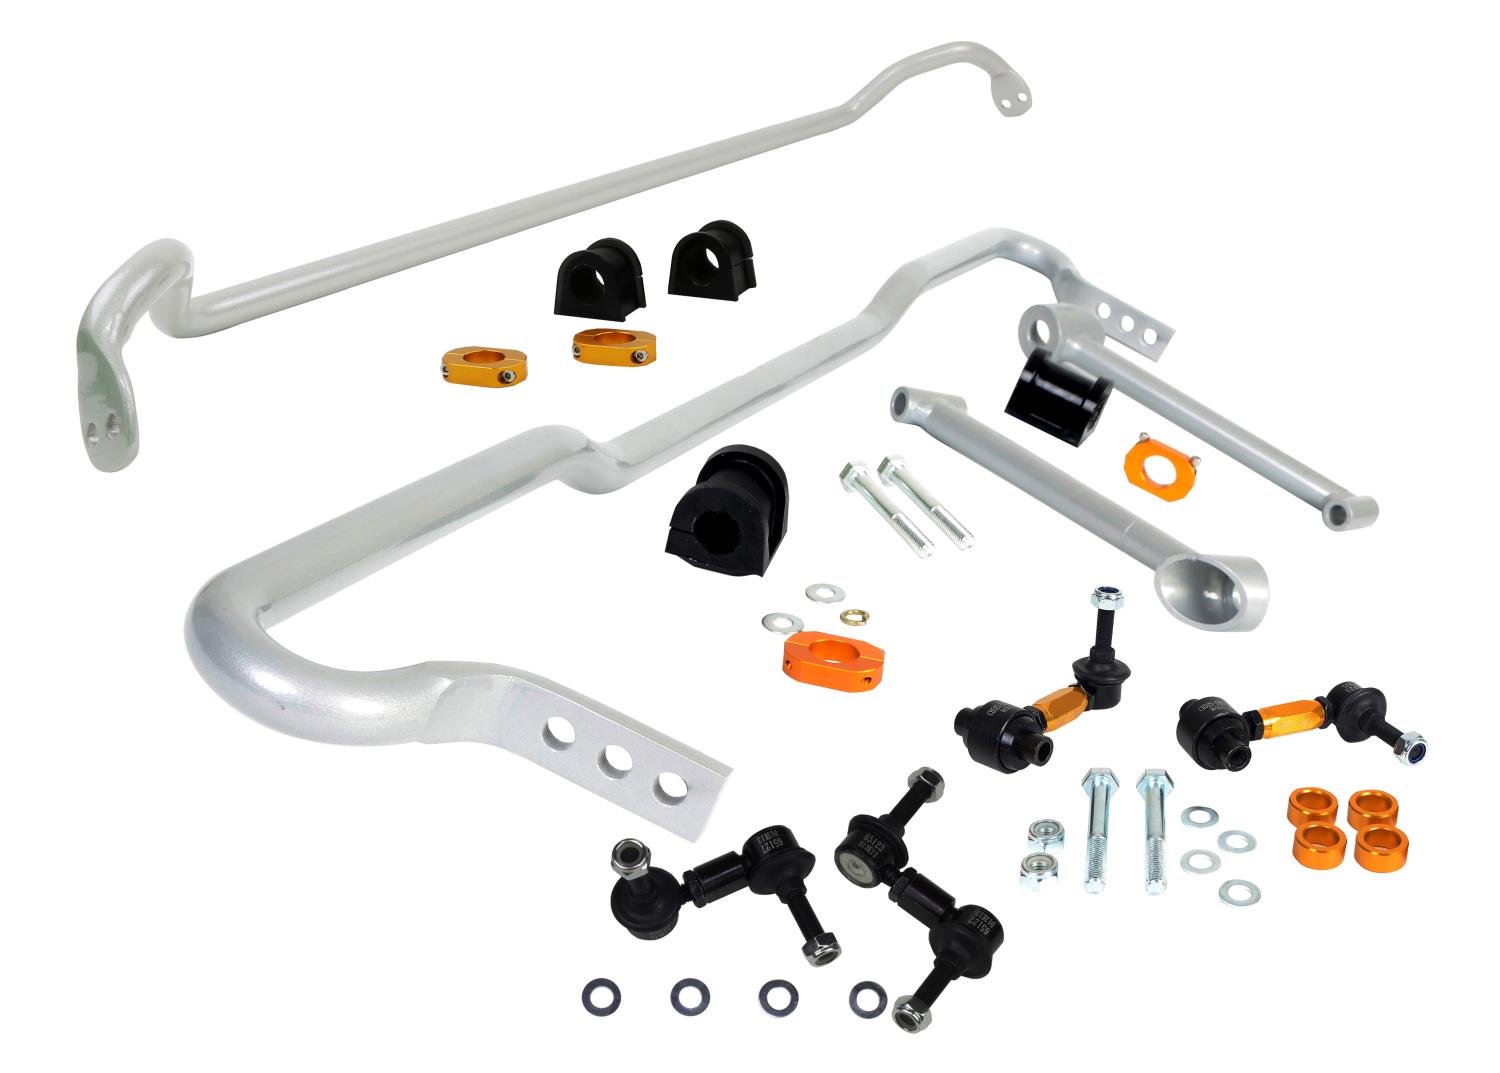 BSK011 Front And Rear Sway Bar Kit 22 mm for 2008-2010 Subaru WRX